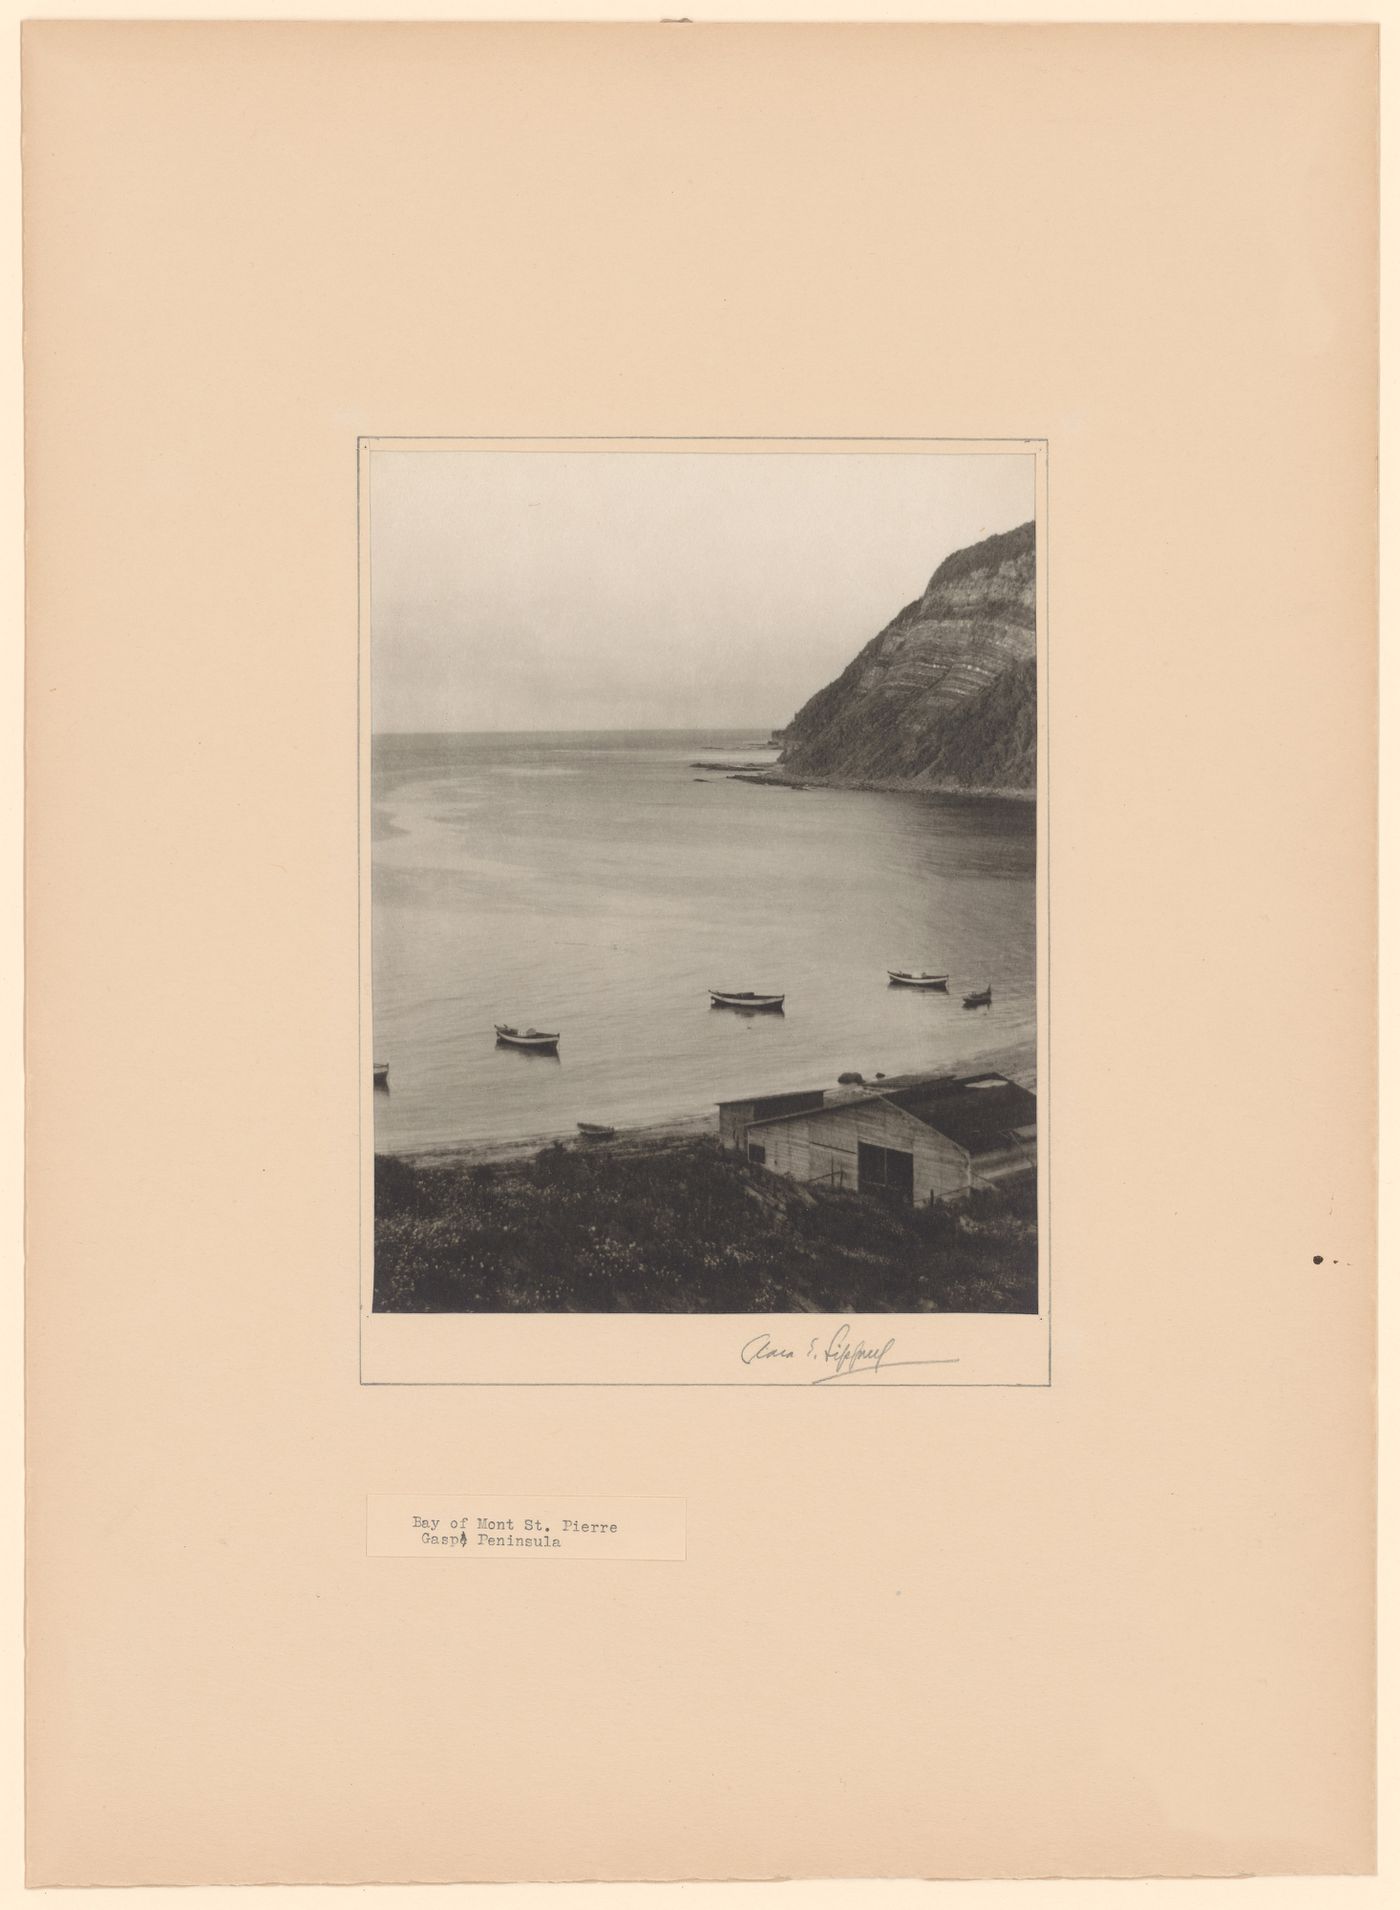 View of Anse de Mont-Saint-Pierre showing sheds and boats in the foreground, Gaspé Peninsula, Québec, Canada